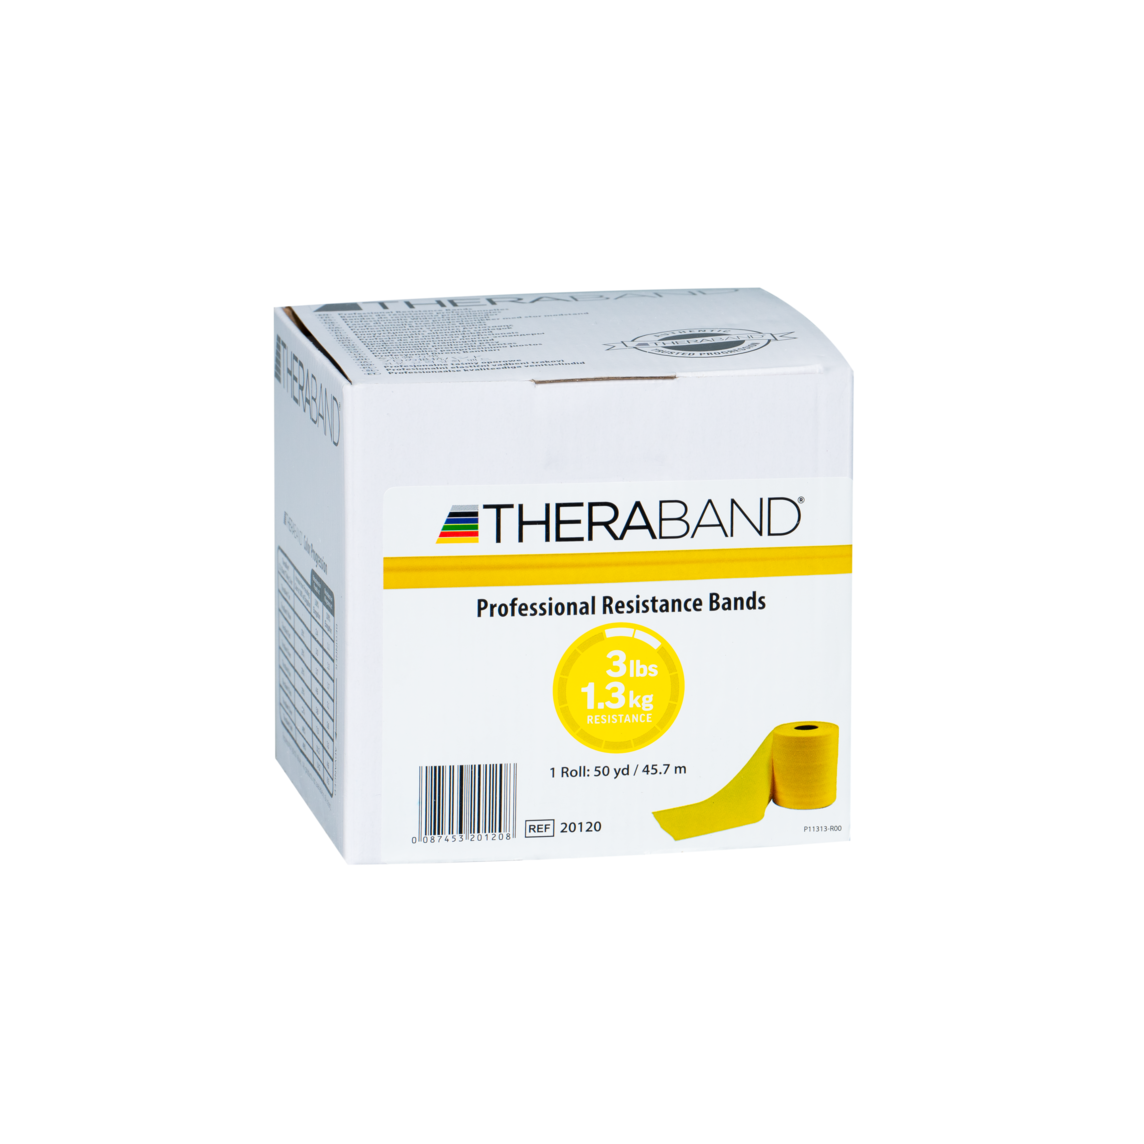 TheraBand Bands - 50 Yard Roll - physio supplies canada